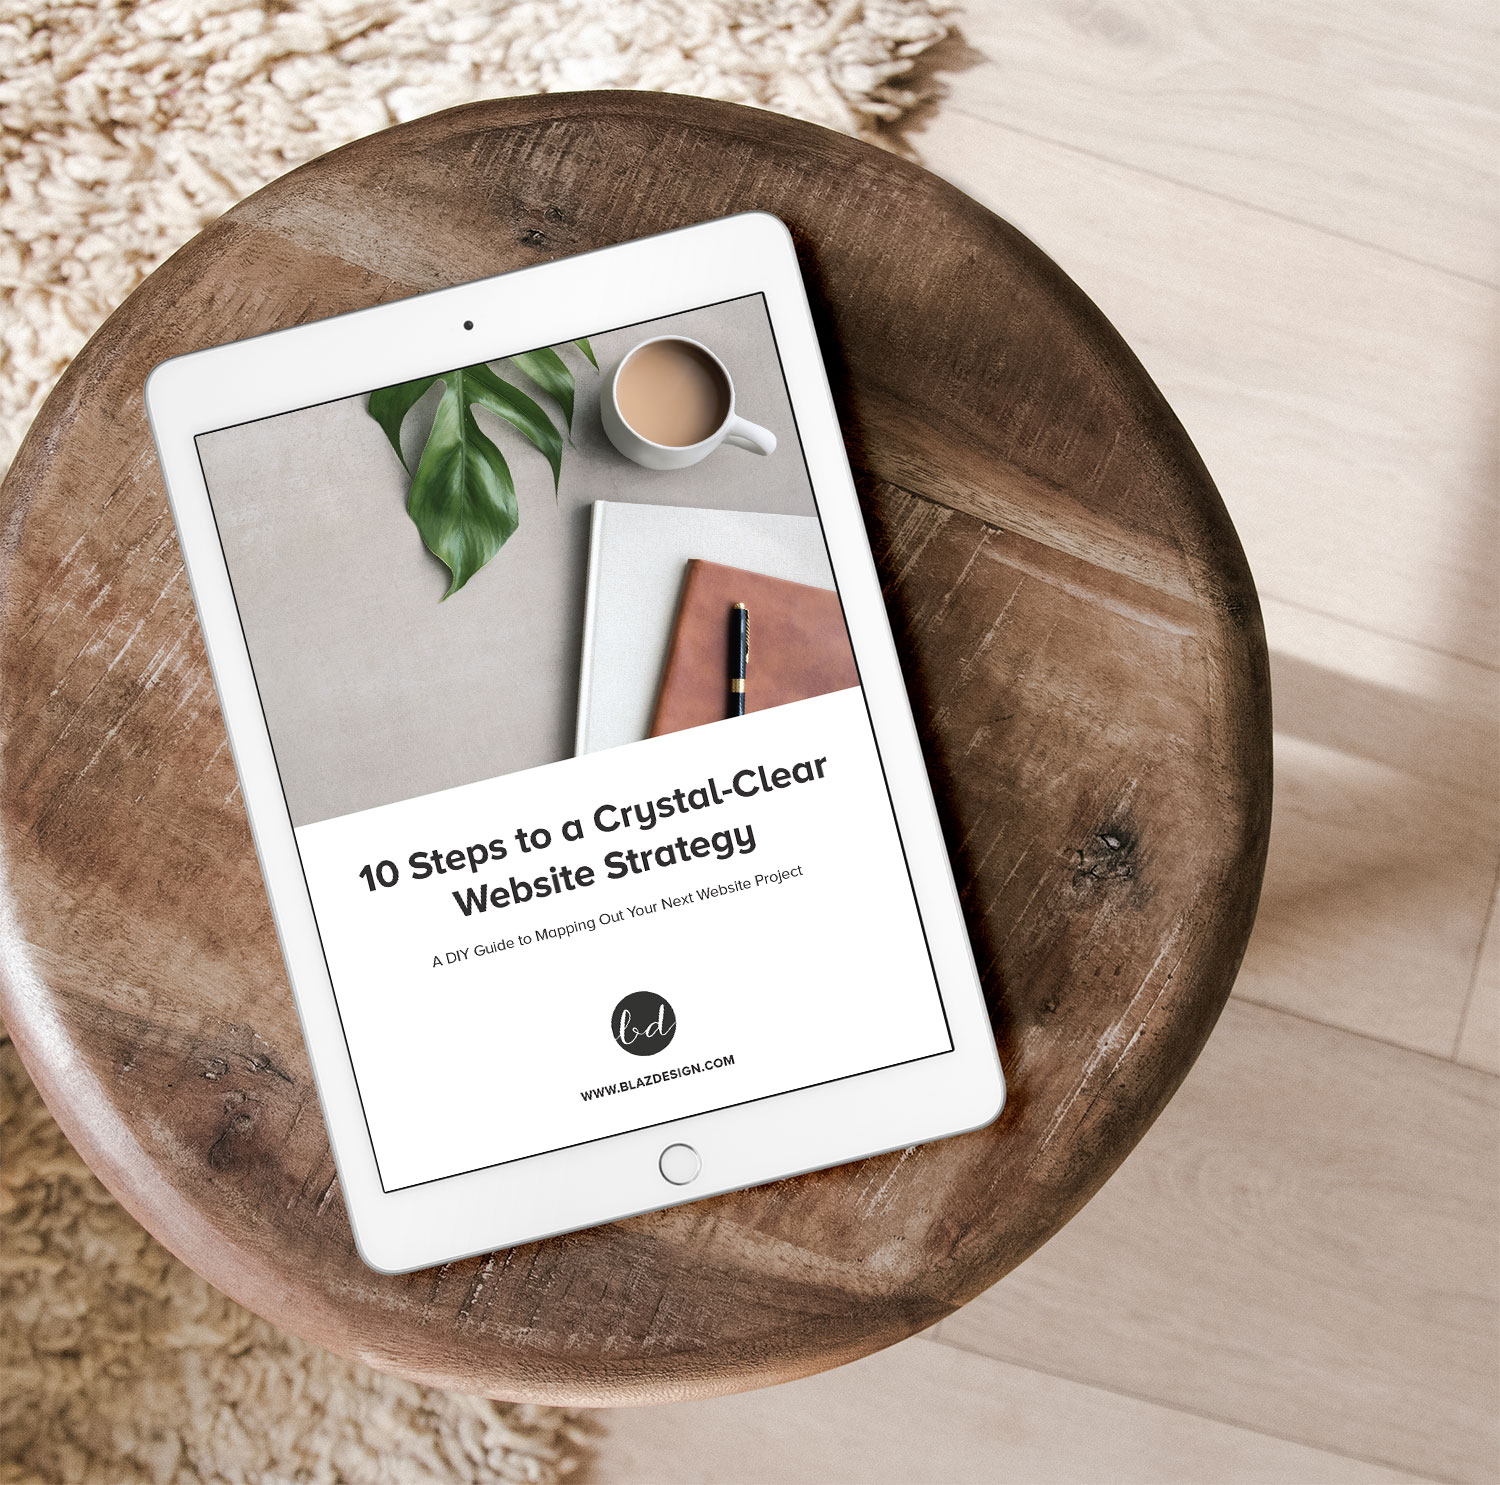 Free Ebook: 10 Steps to a Crystal-Clear Website Strategy